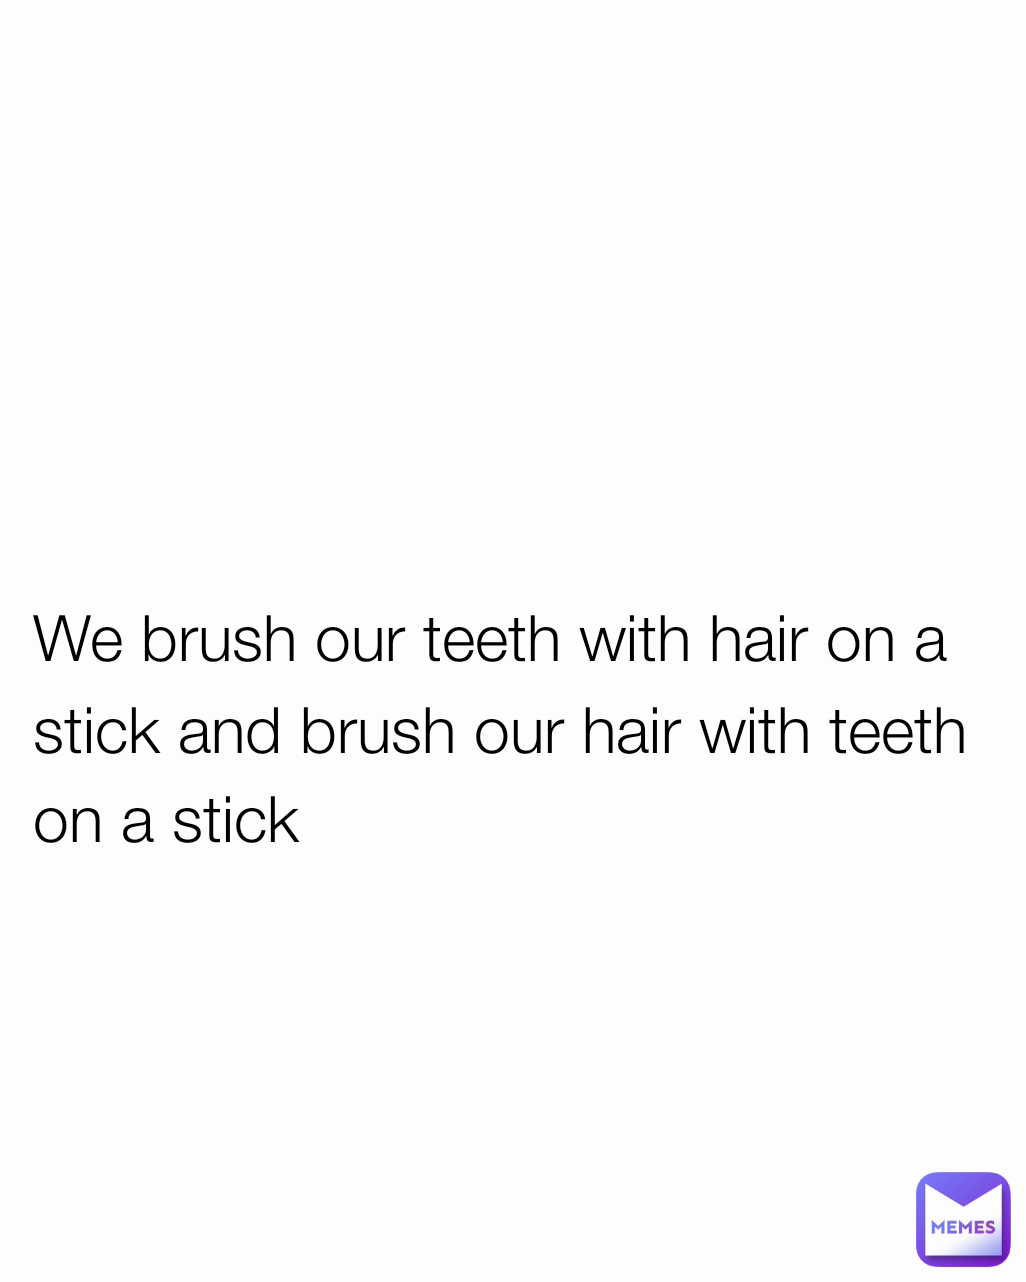 We brush our teeth with hair on a stick and brush our hair with teeth on a stick